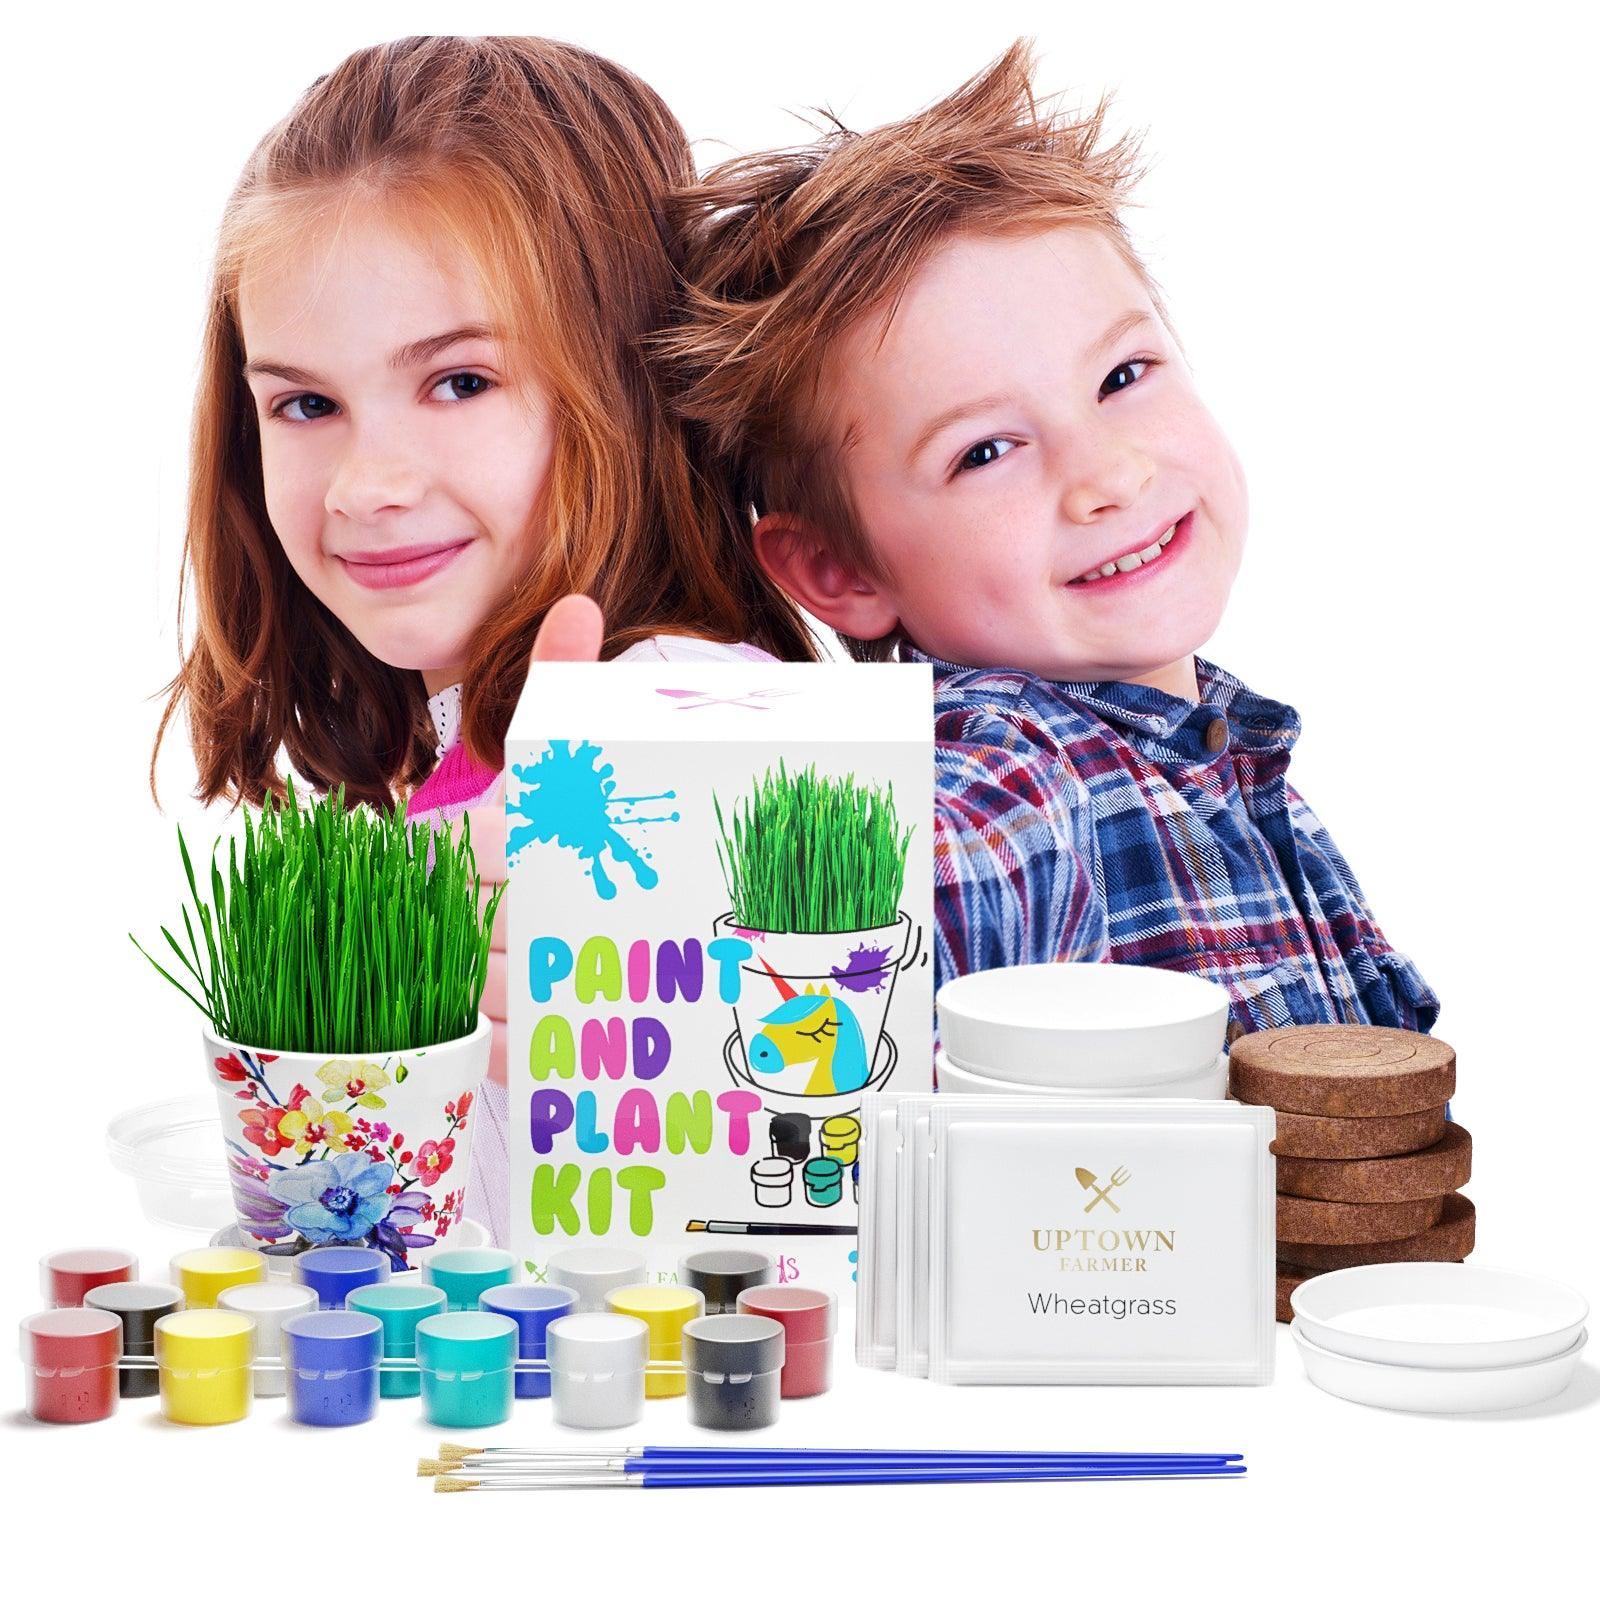 Paint & Plant Kids Flower Pot Growing Kit with USA Seeds - Uptown Farmer